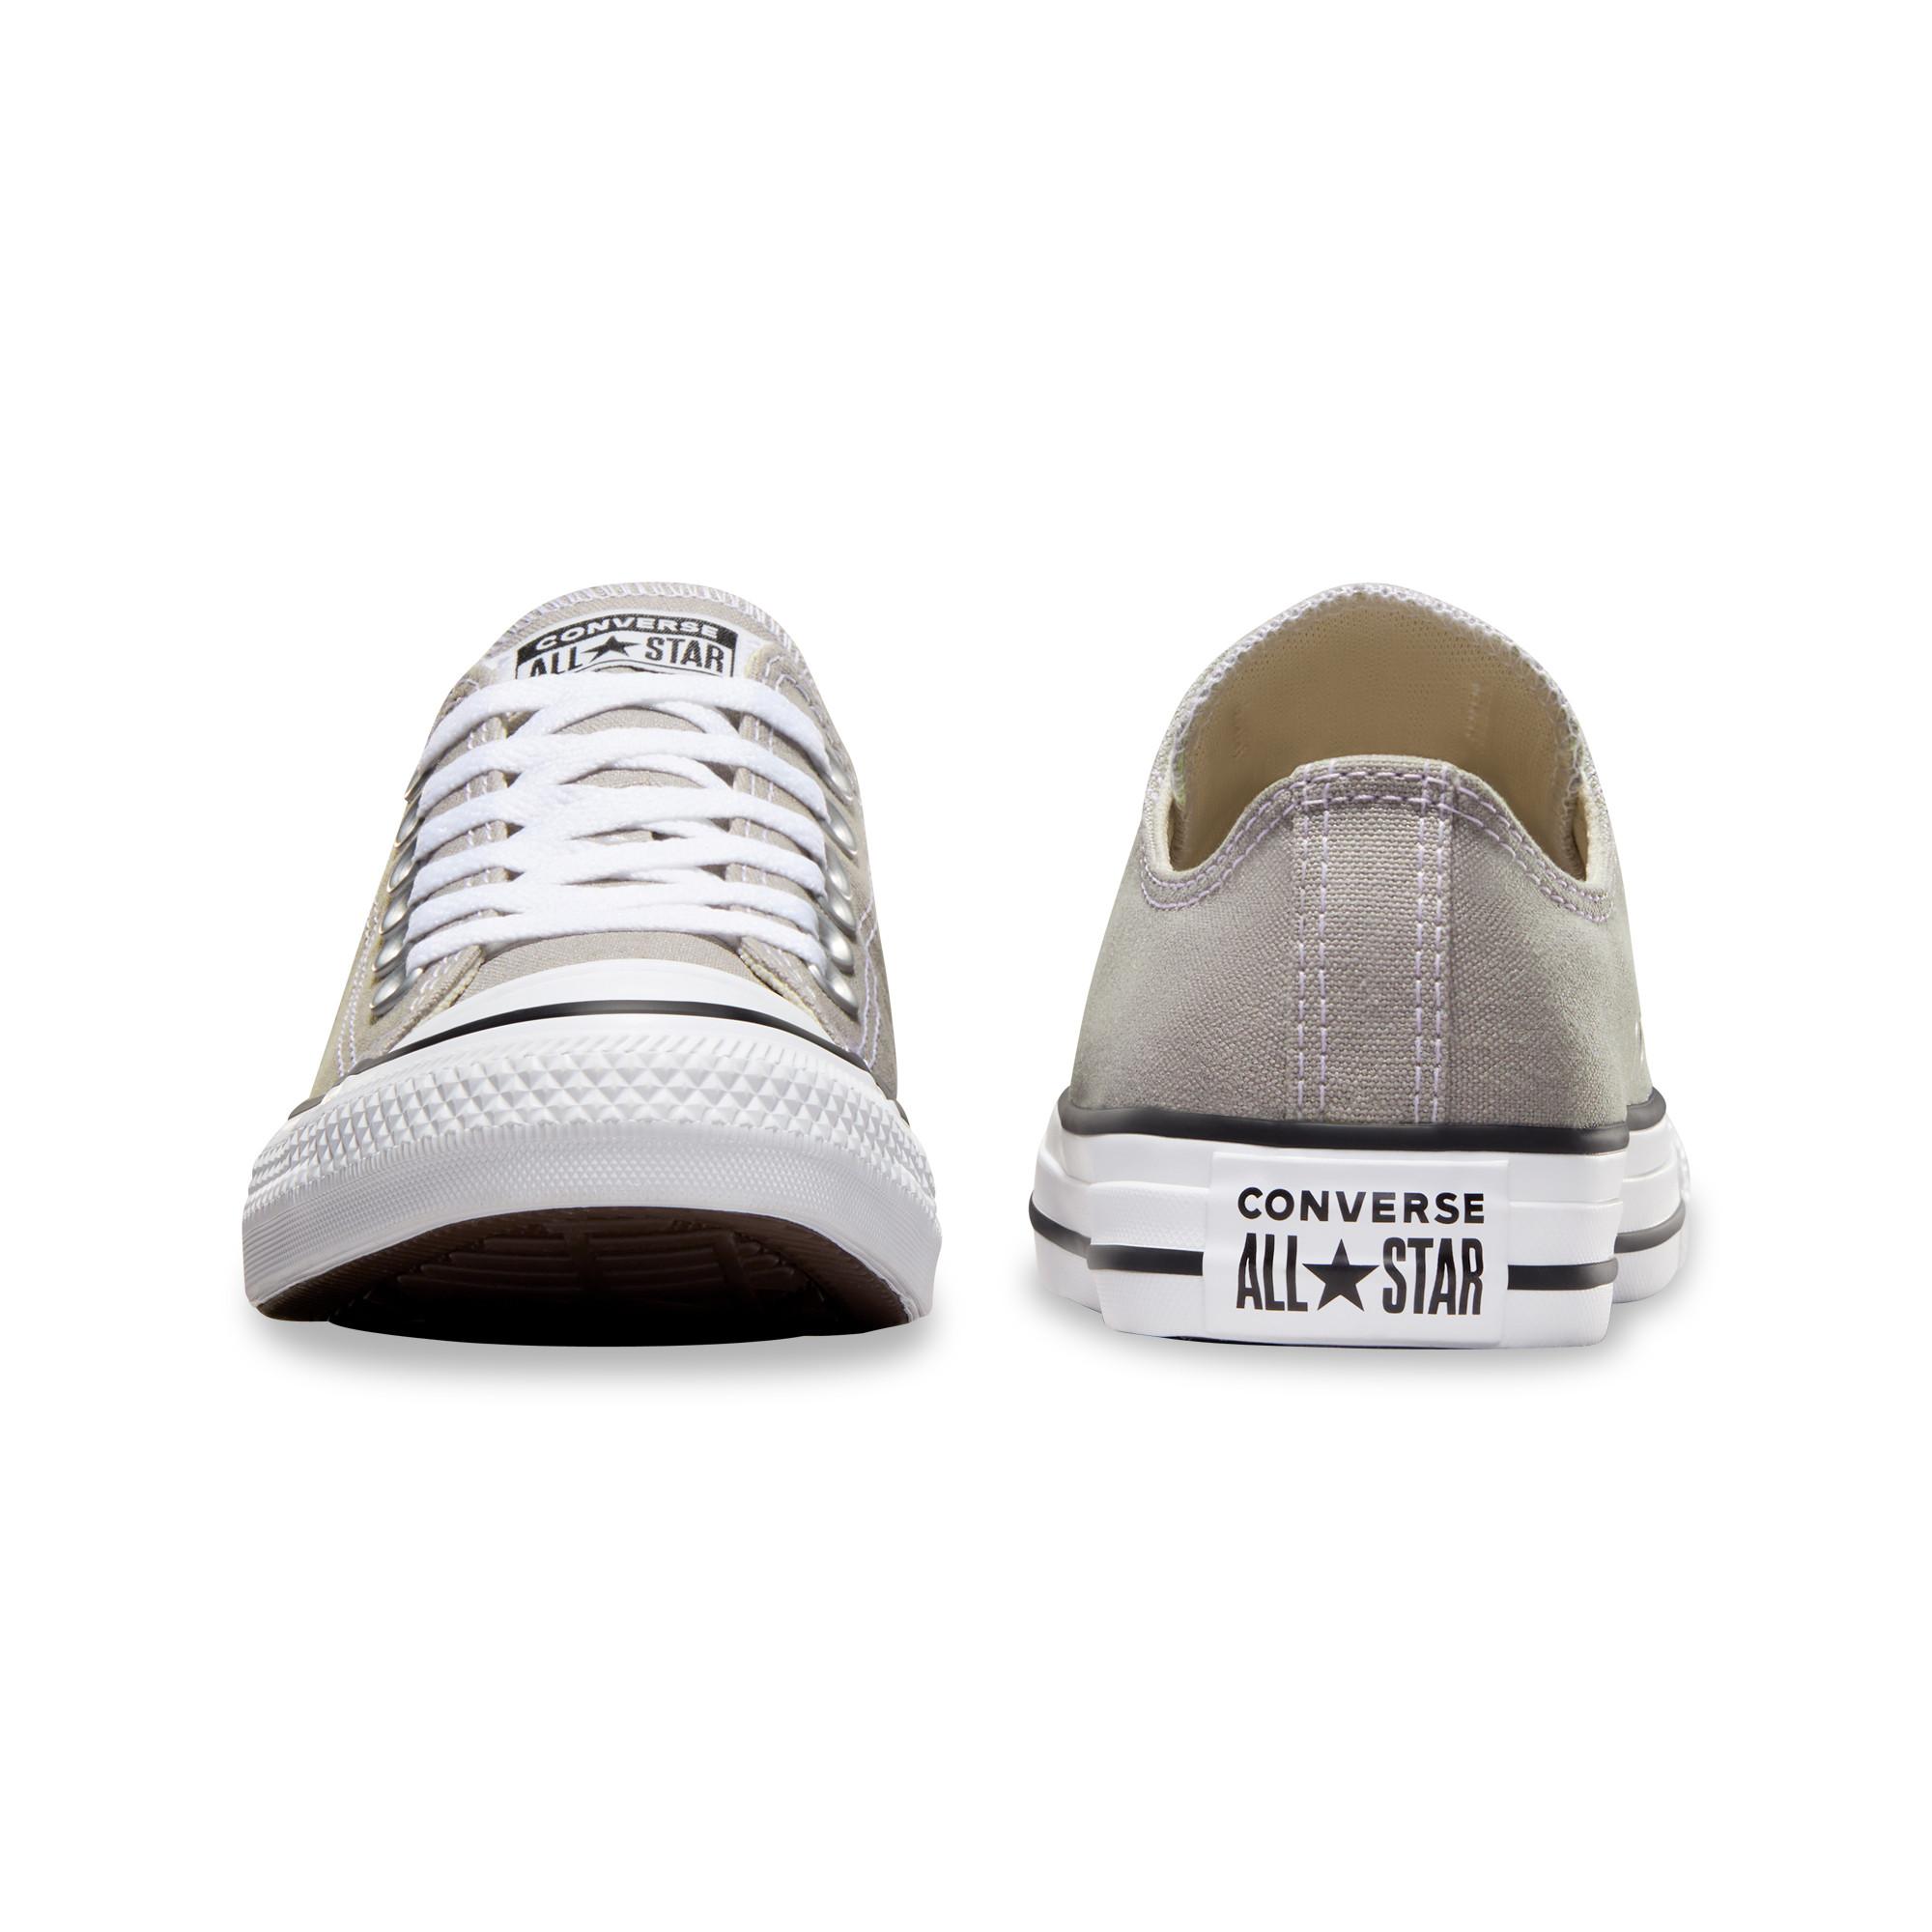 CONVERSE CHUCK TAYLOR ALL STAR Sneakers basse 